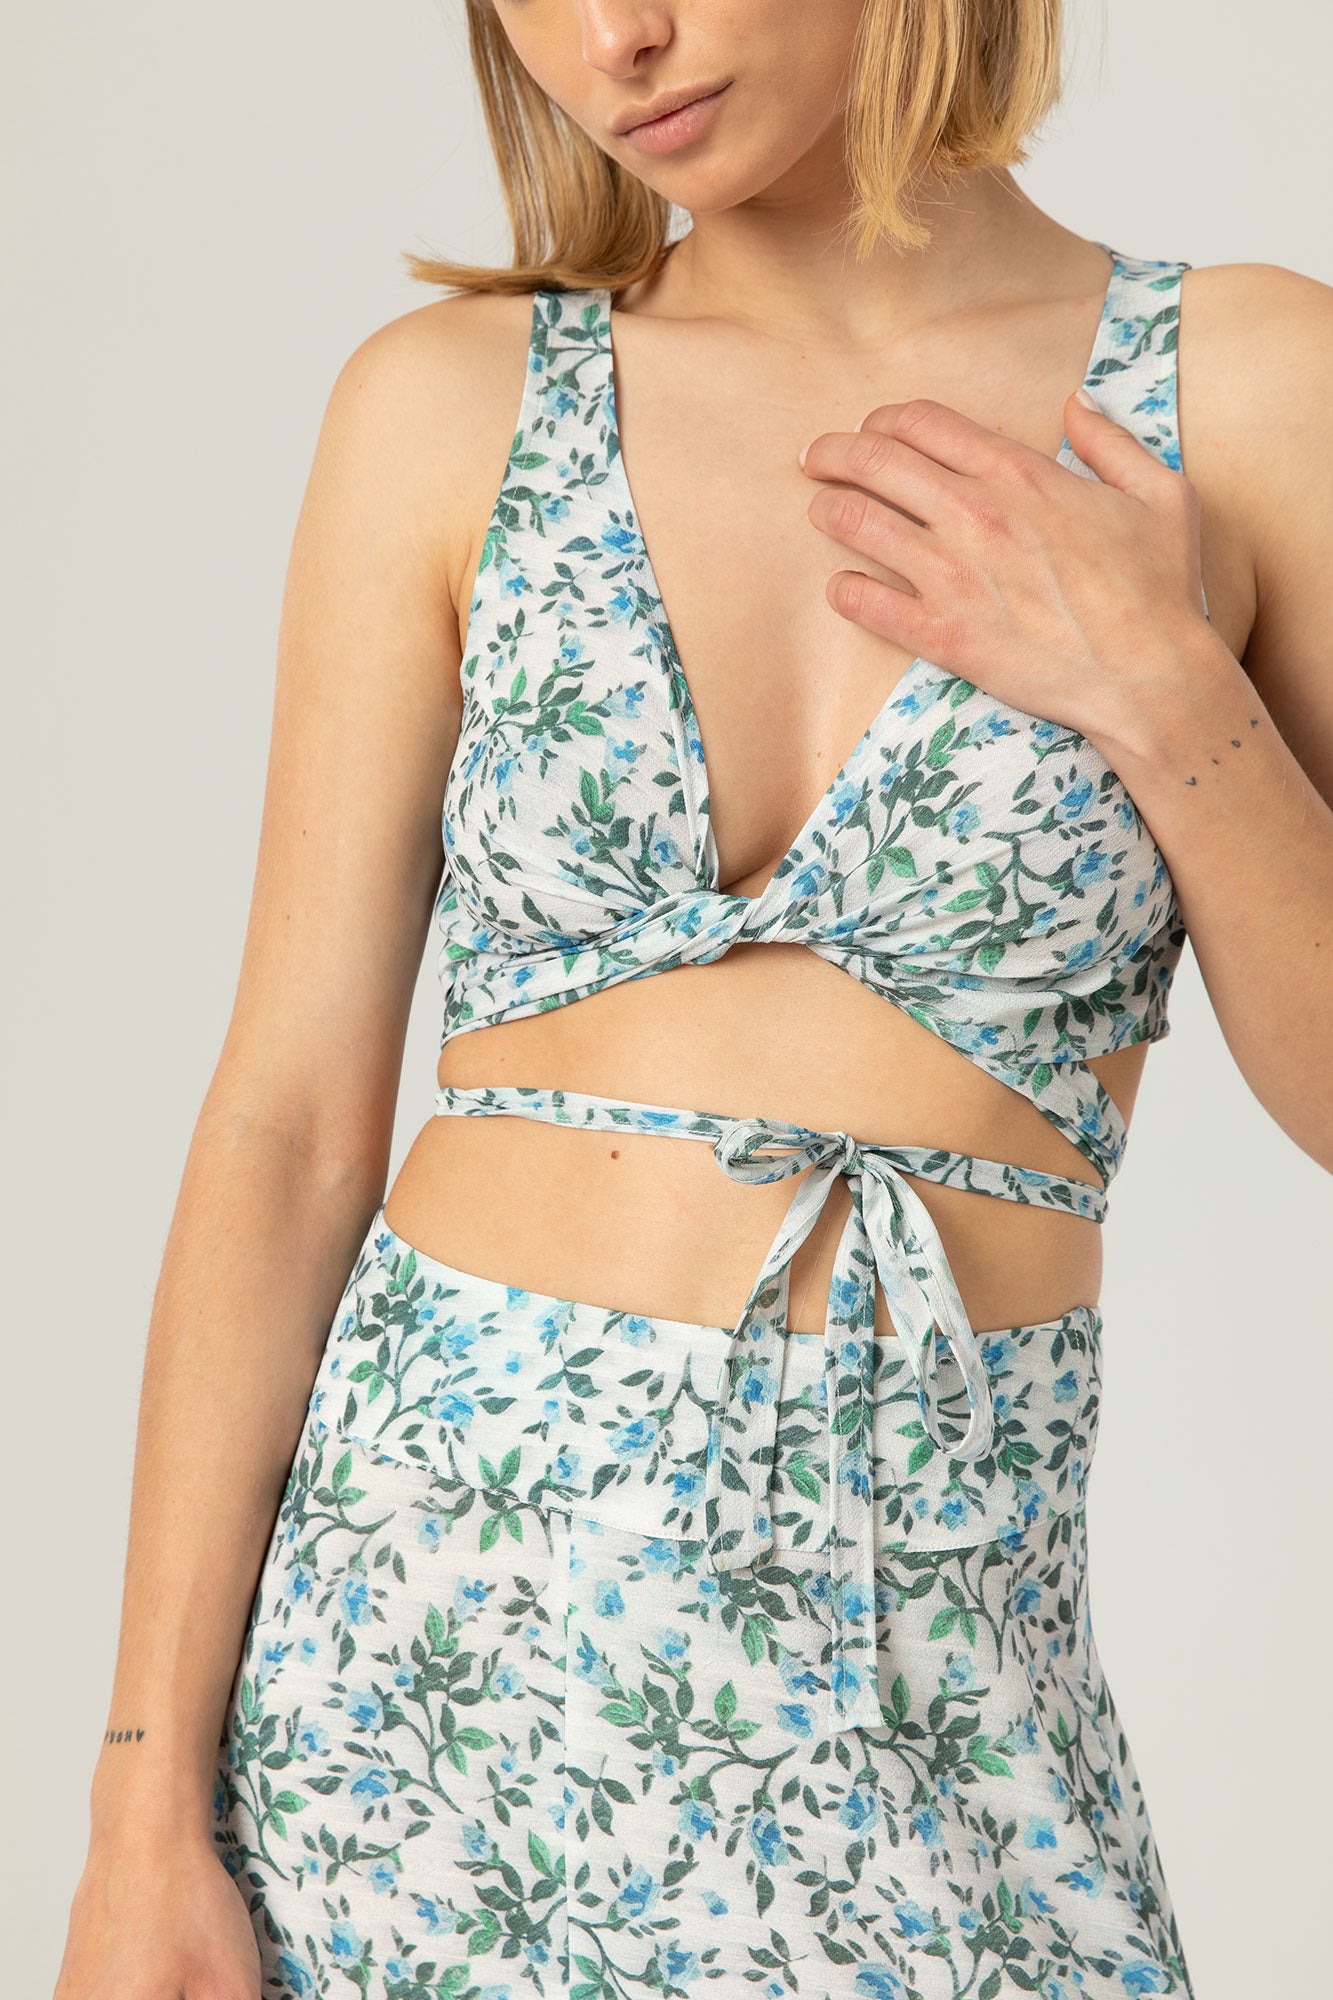 The Sun Top | Floral Green, Blue and White